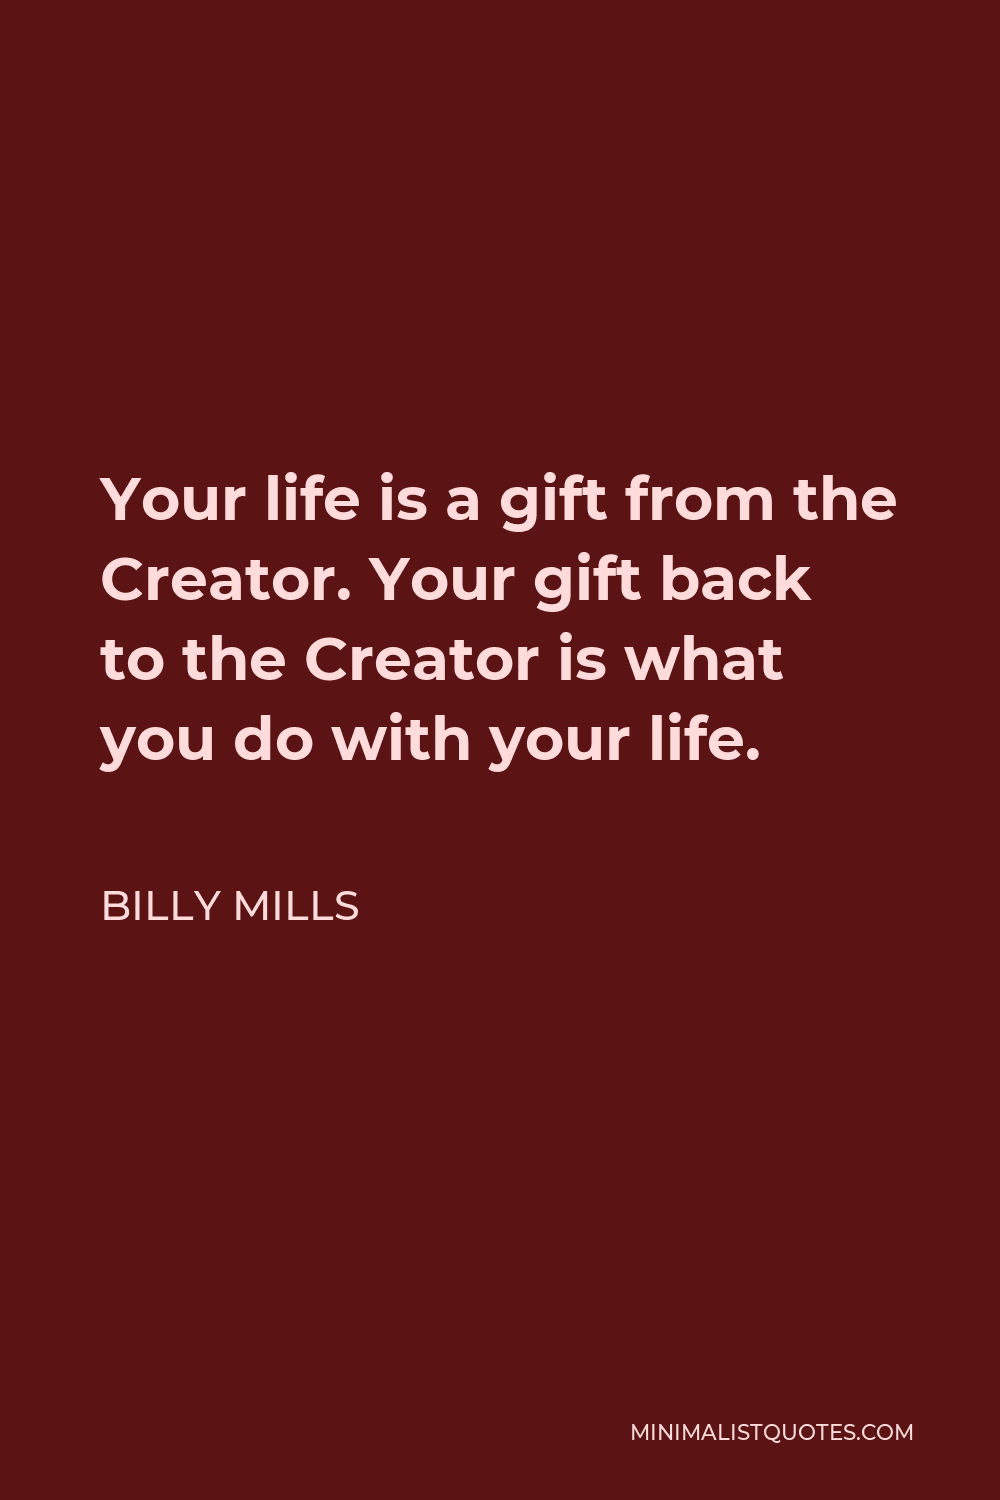 Billy Mills Quote - Your life is a gift from the Creator. Your gift back to the Creator is what you do with your life.